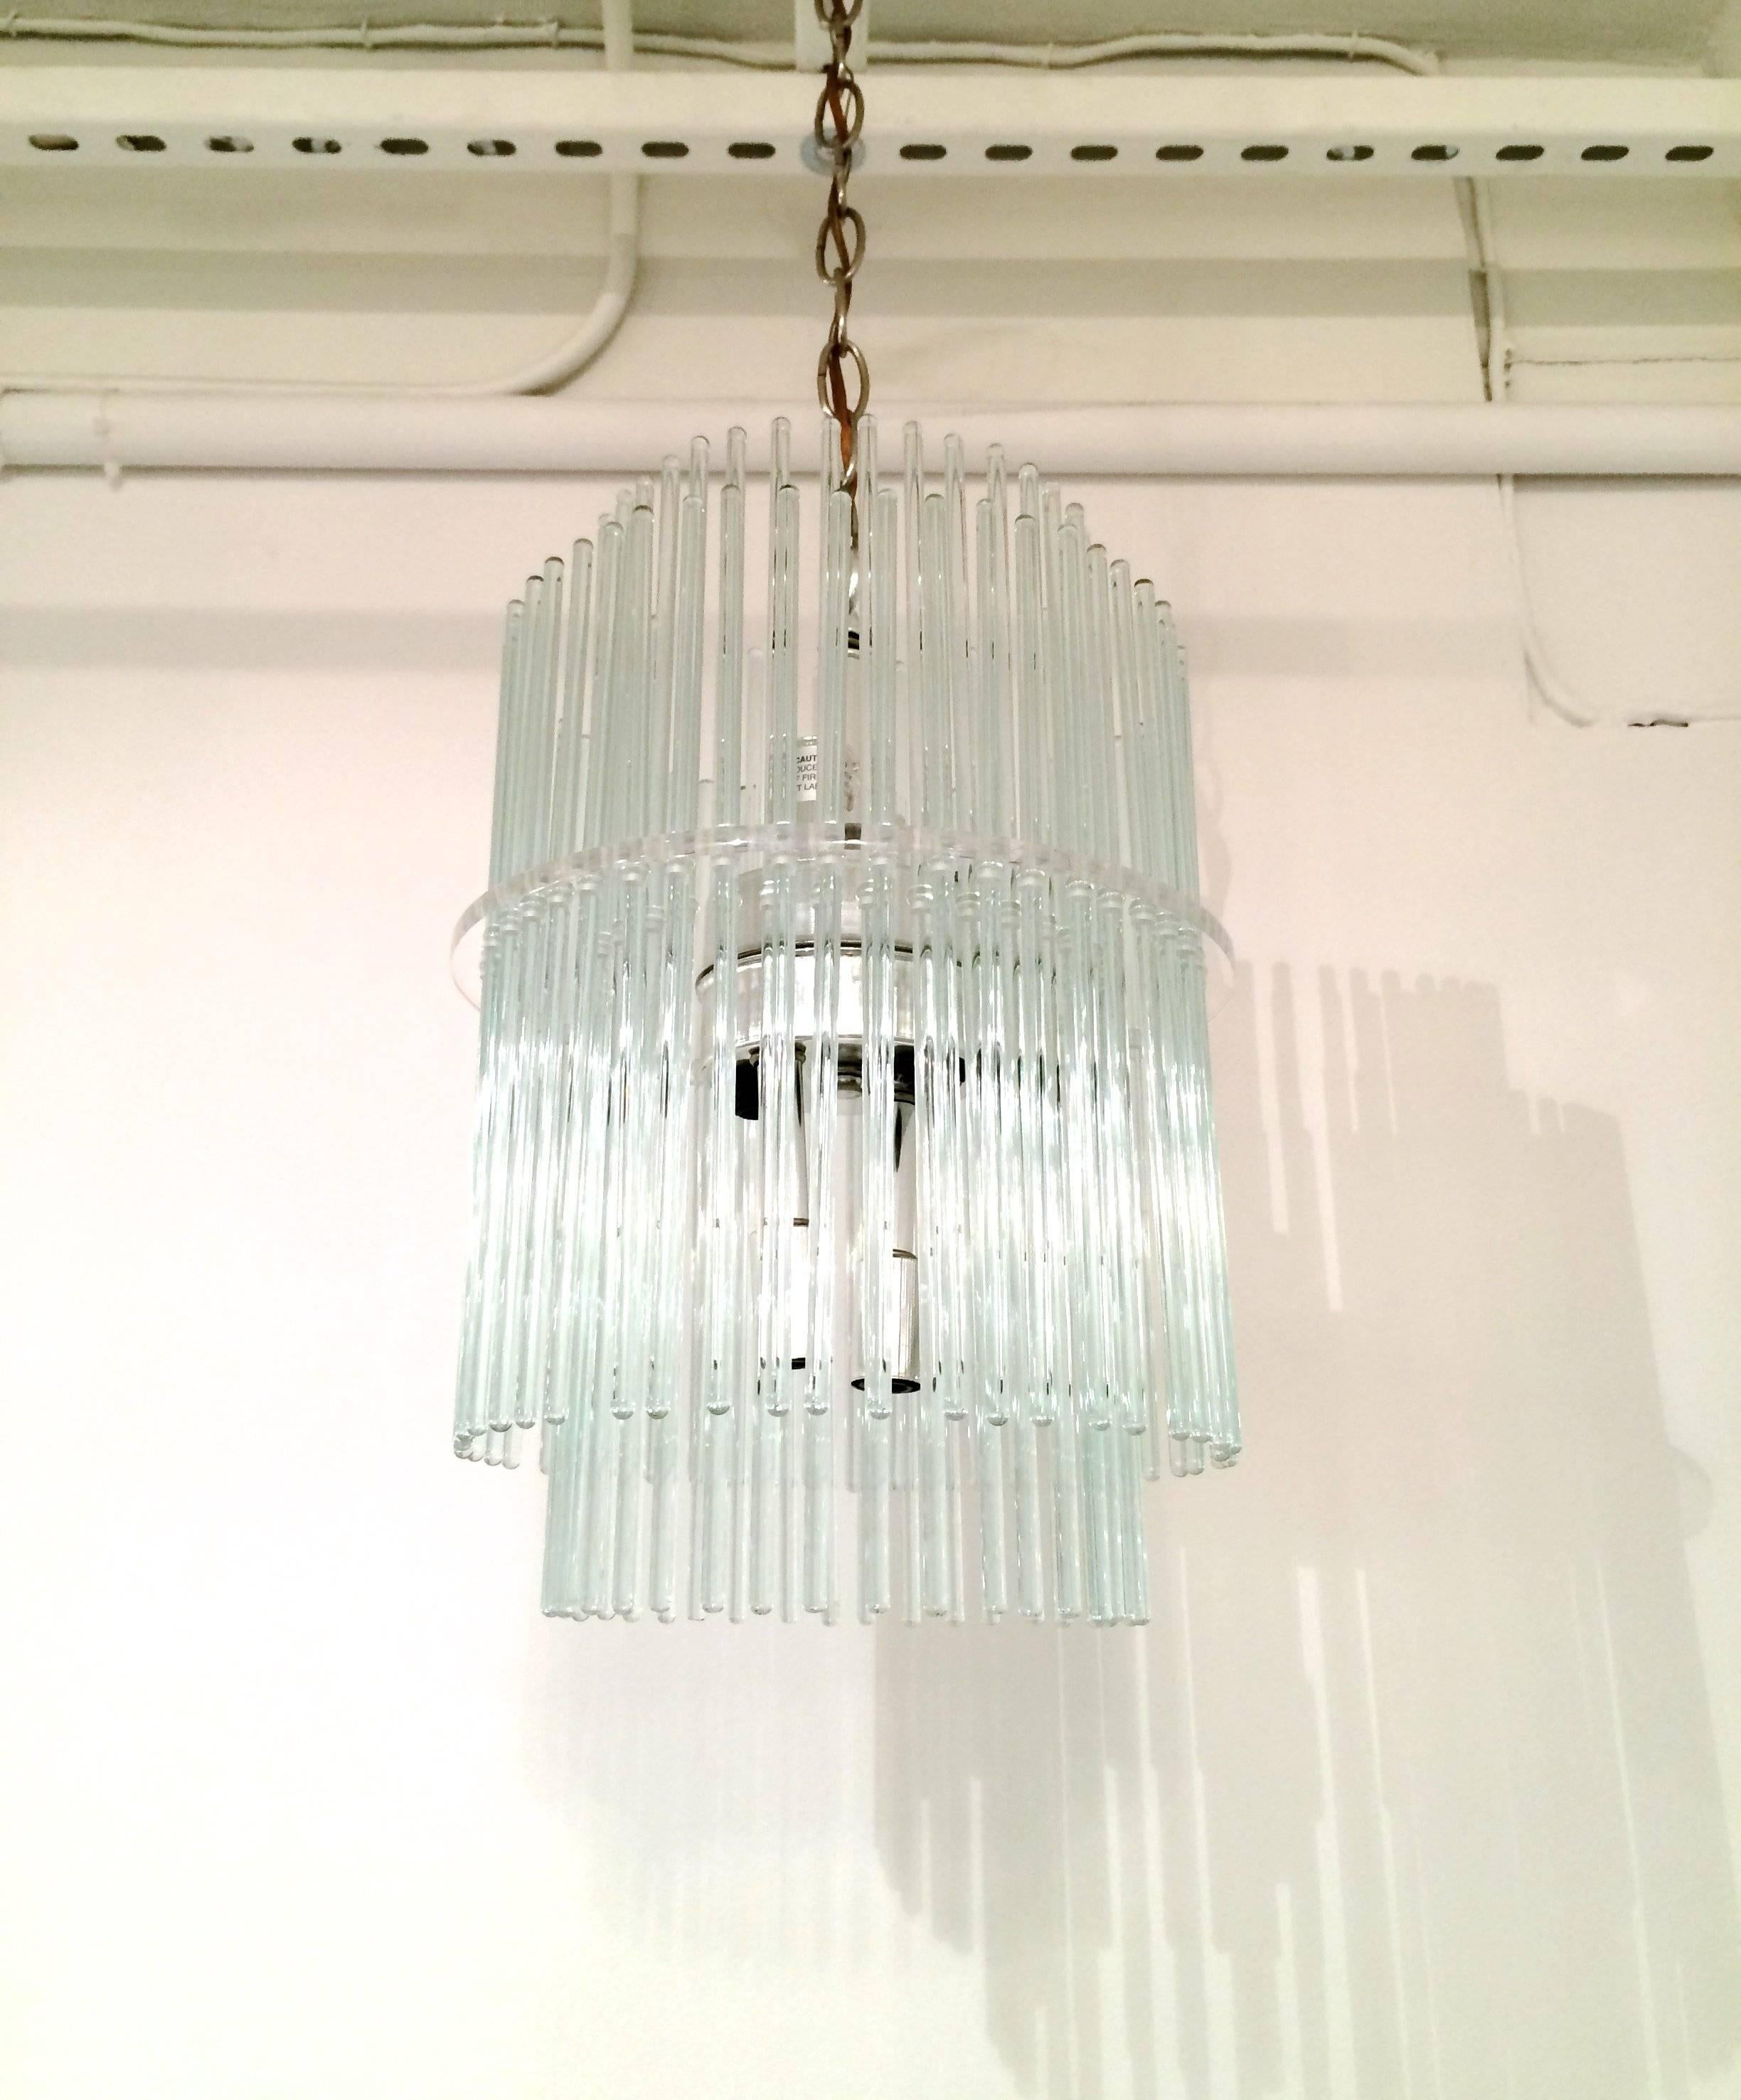 Two-tier glass rod chandelier by Gaetano Sciolari for Lightolier. Lucite center disk and Eight chrome sockets and fittings. Measurement length includes chain.